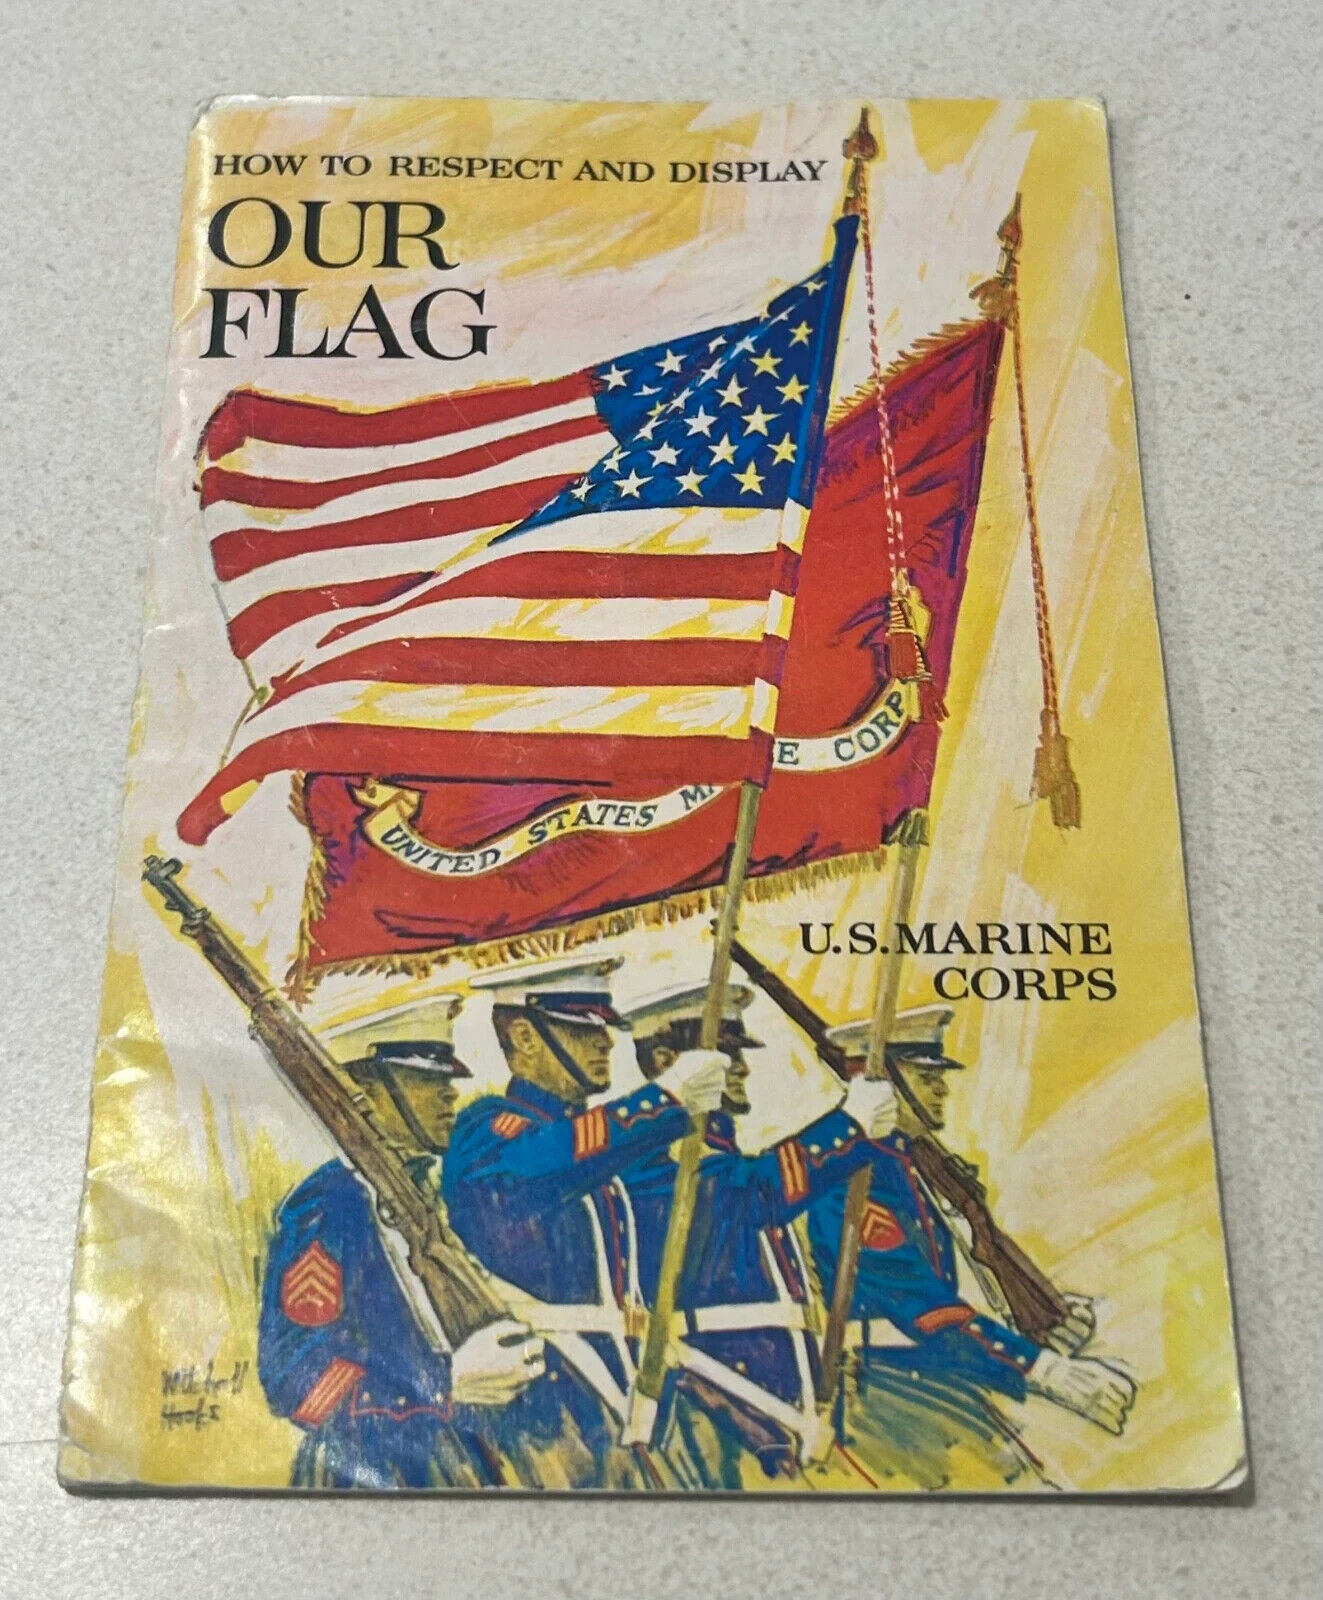 Vintage 1965 Our flag, How to Respect and Display, Mitchell G. Hooks, U.S. Marin